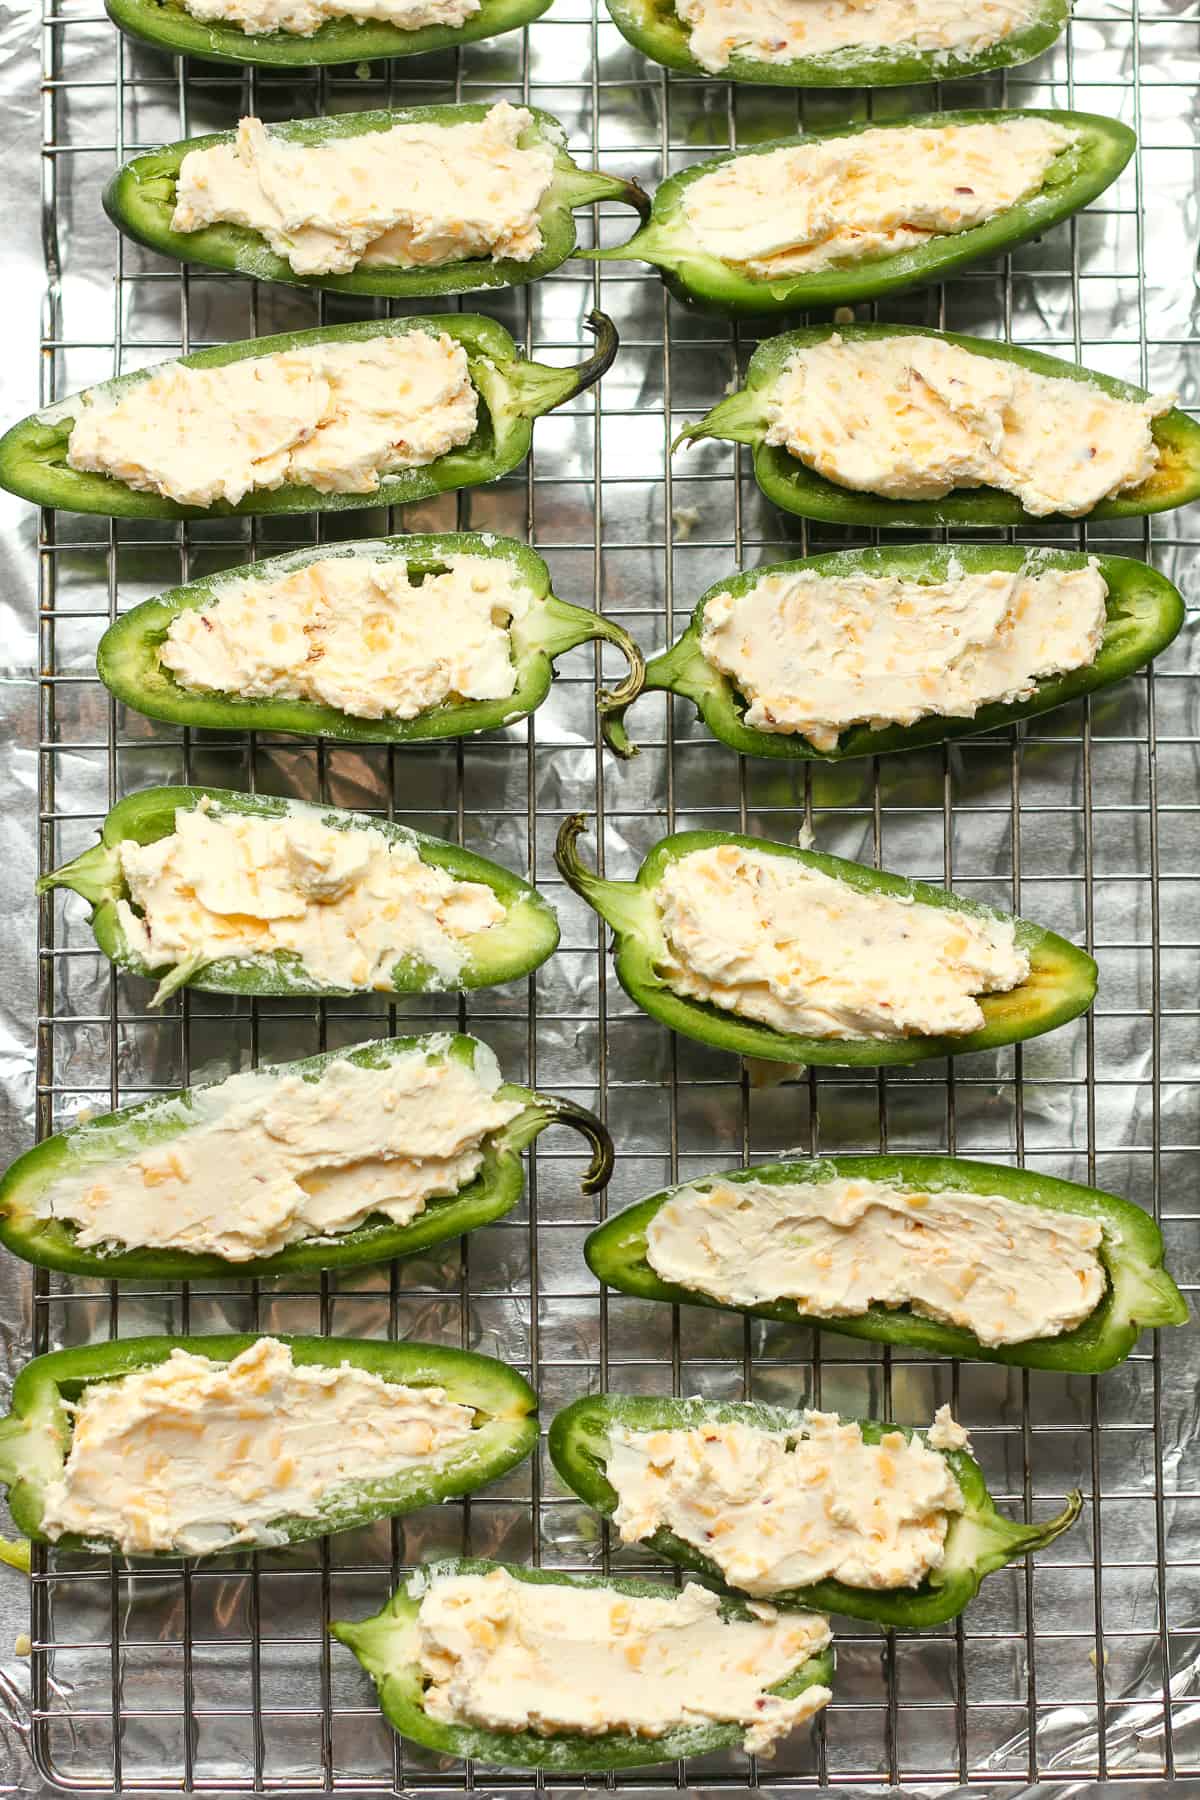 Halved jalapeno peppers stuffed with cream cheese and cheddar cheese.